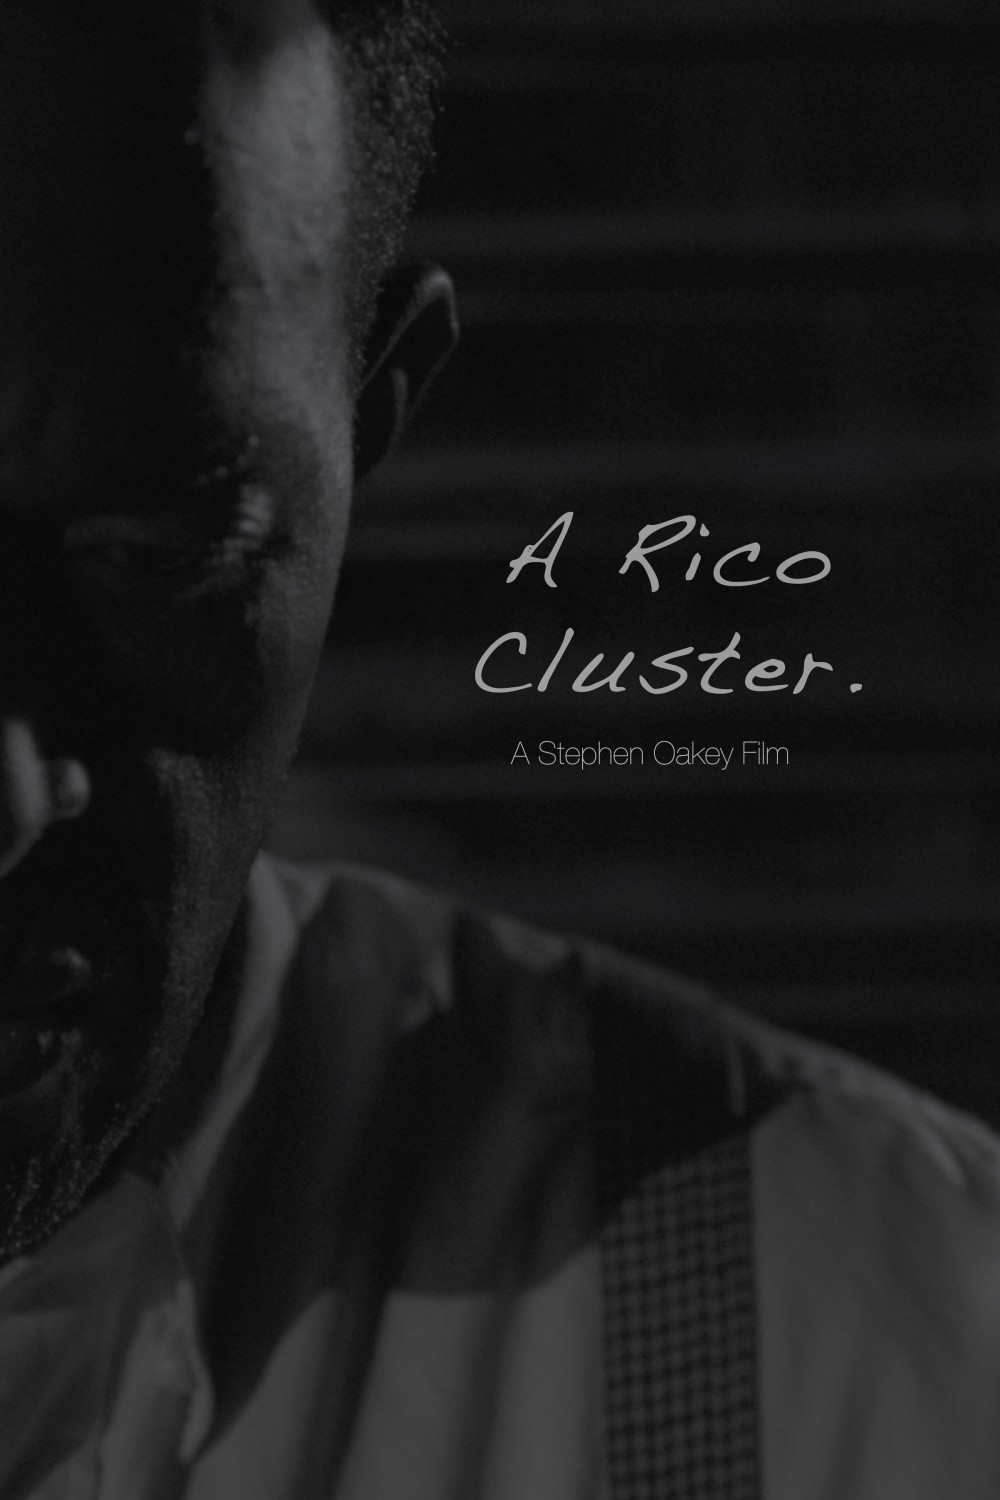 Extra Large Movie Poster Image for A Rico Cluster